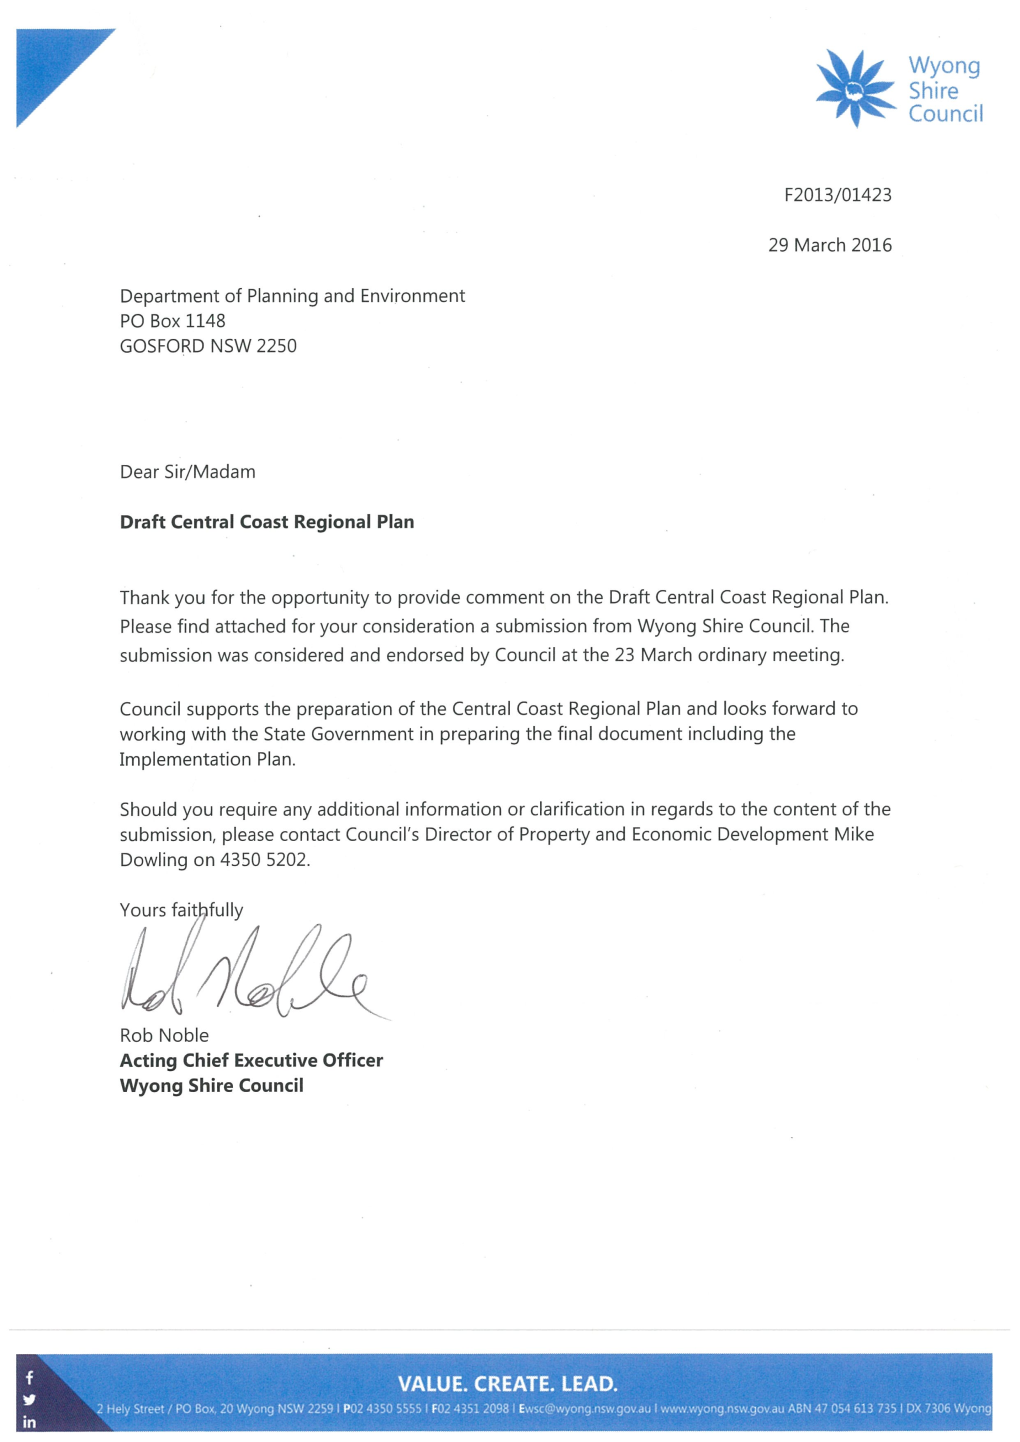 Wyong Shire Council Submission in Response to the Central Coast Regional Plan